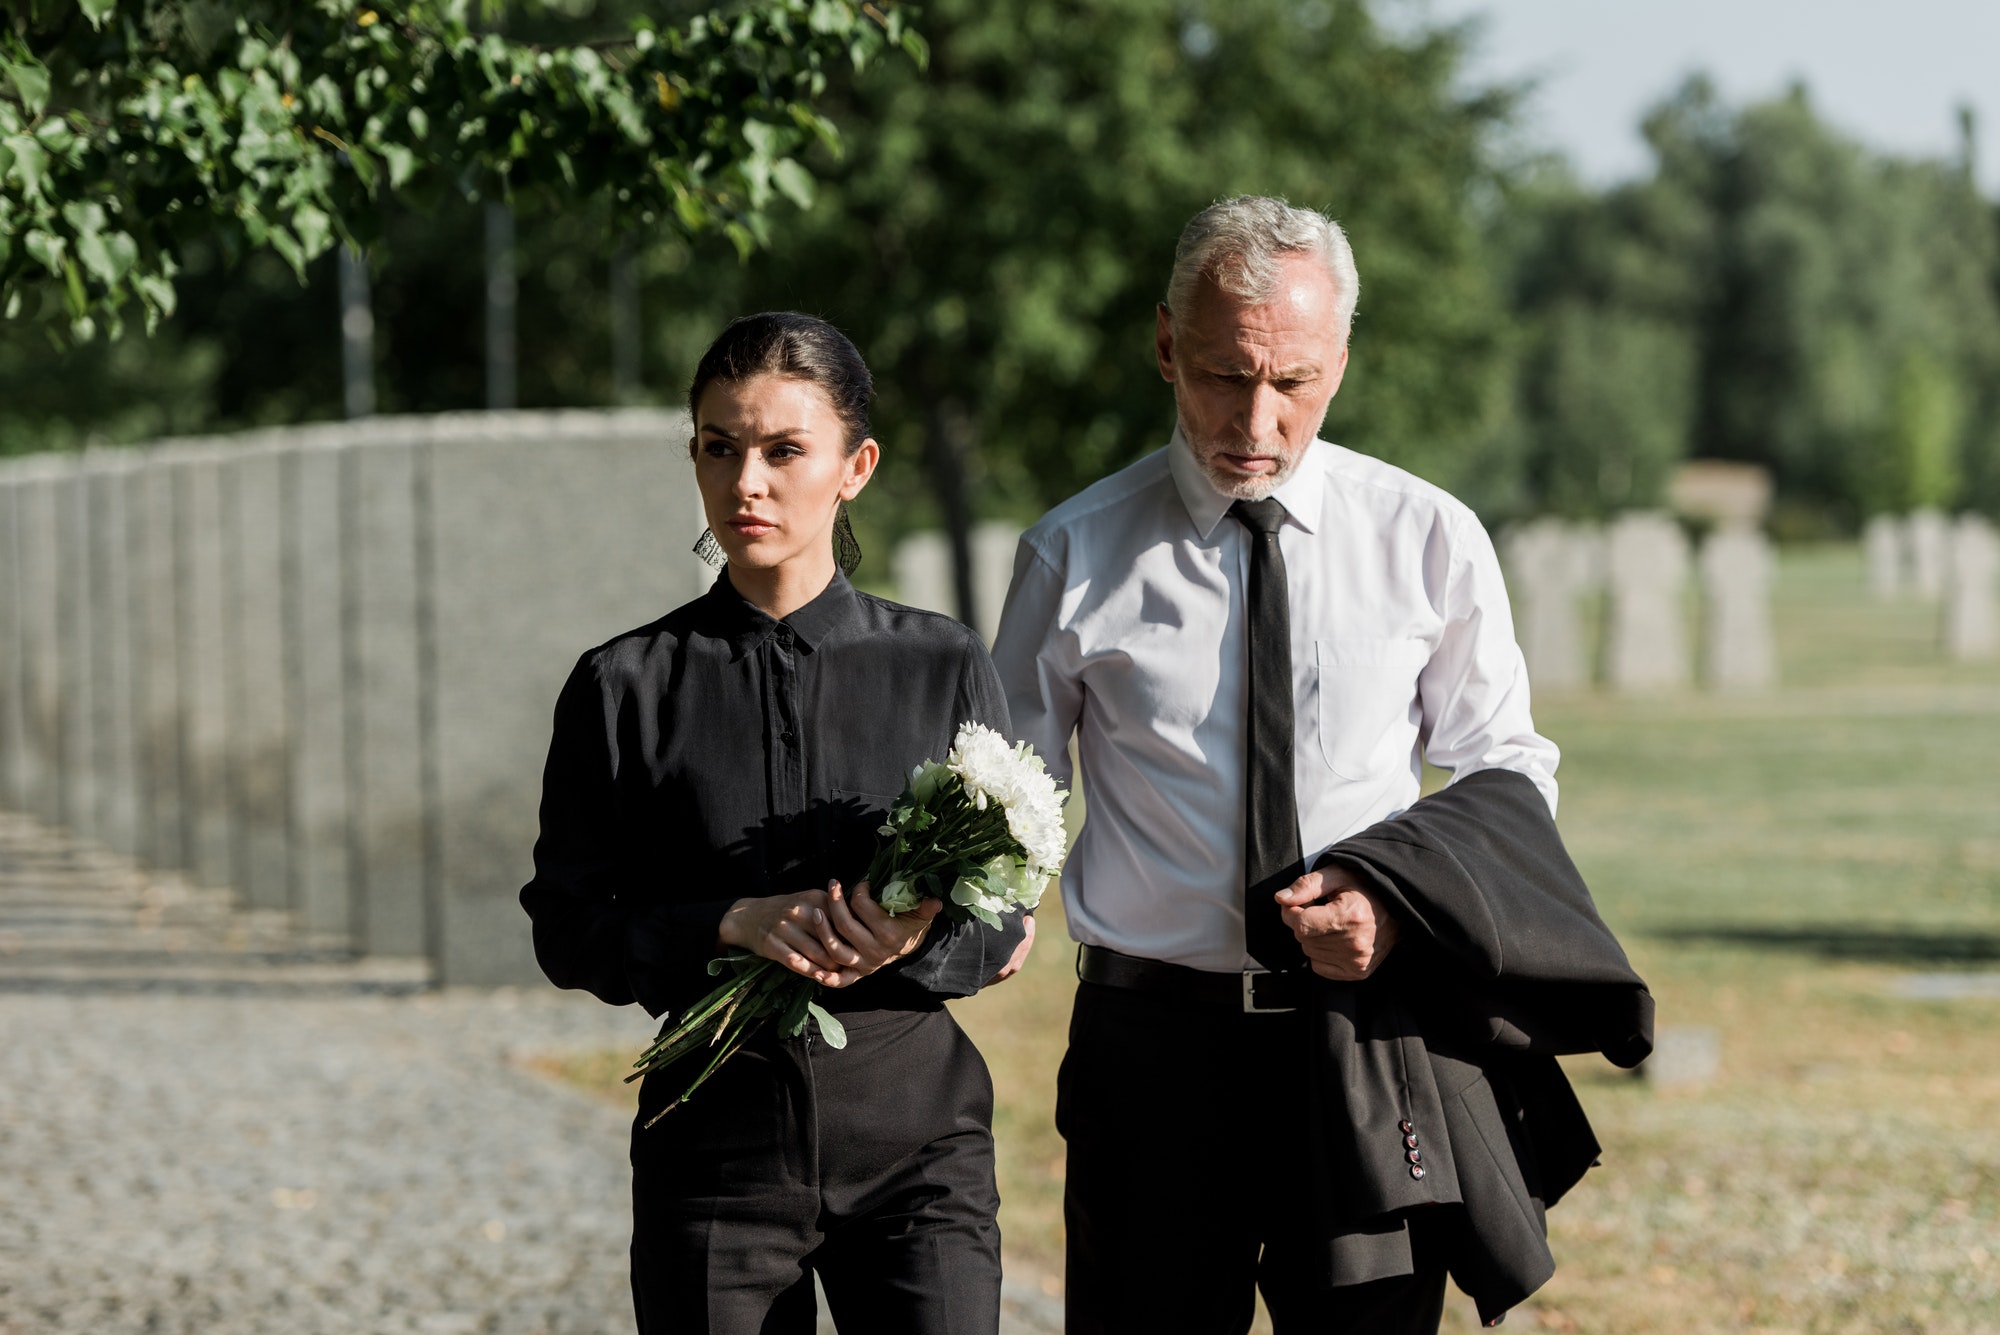 handsome-senior-man-standing-with-attractive-woman-holding-flowers-on-funeral.jpg